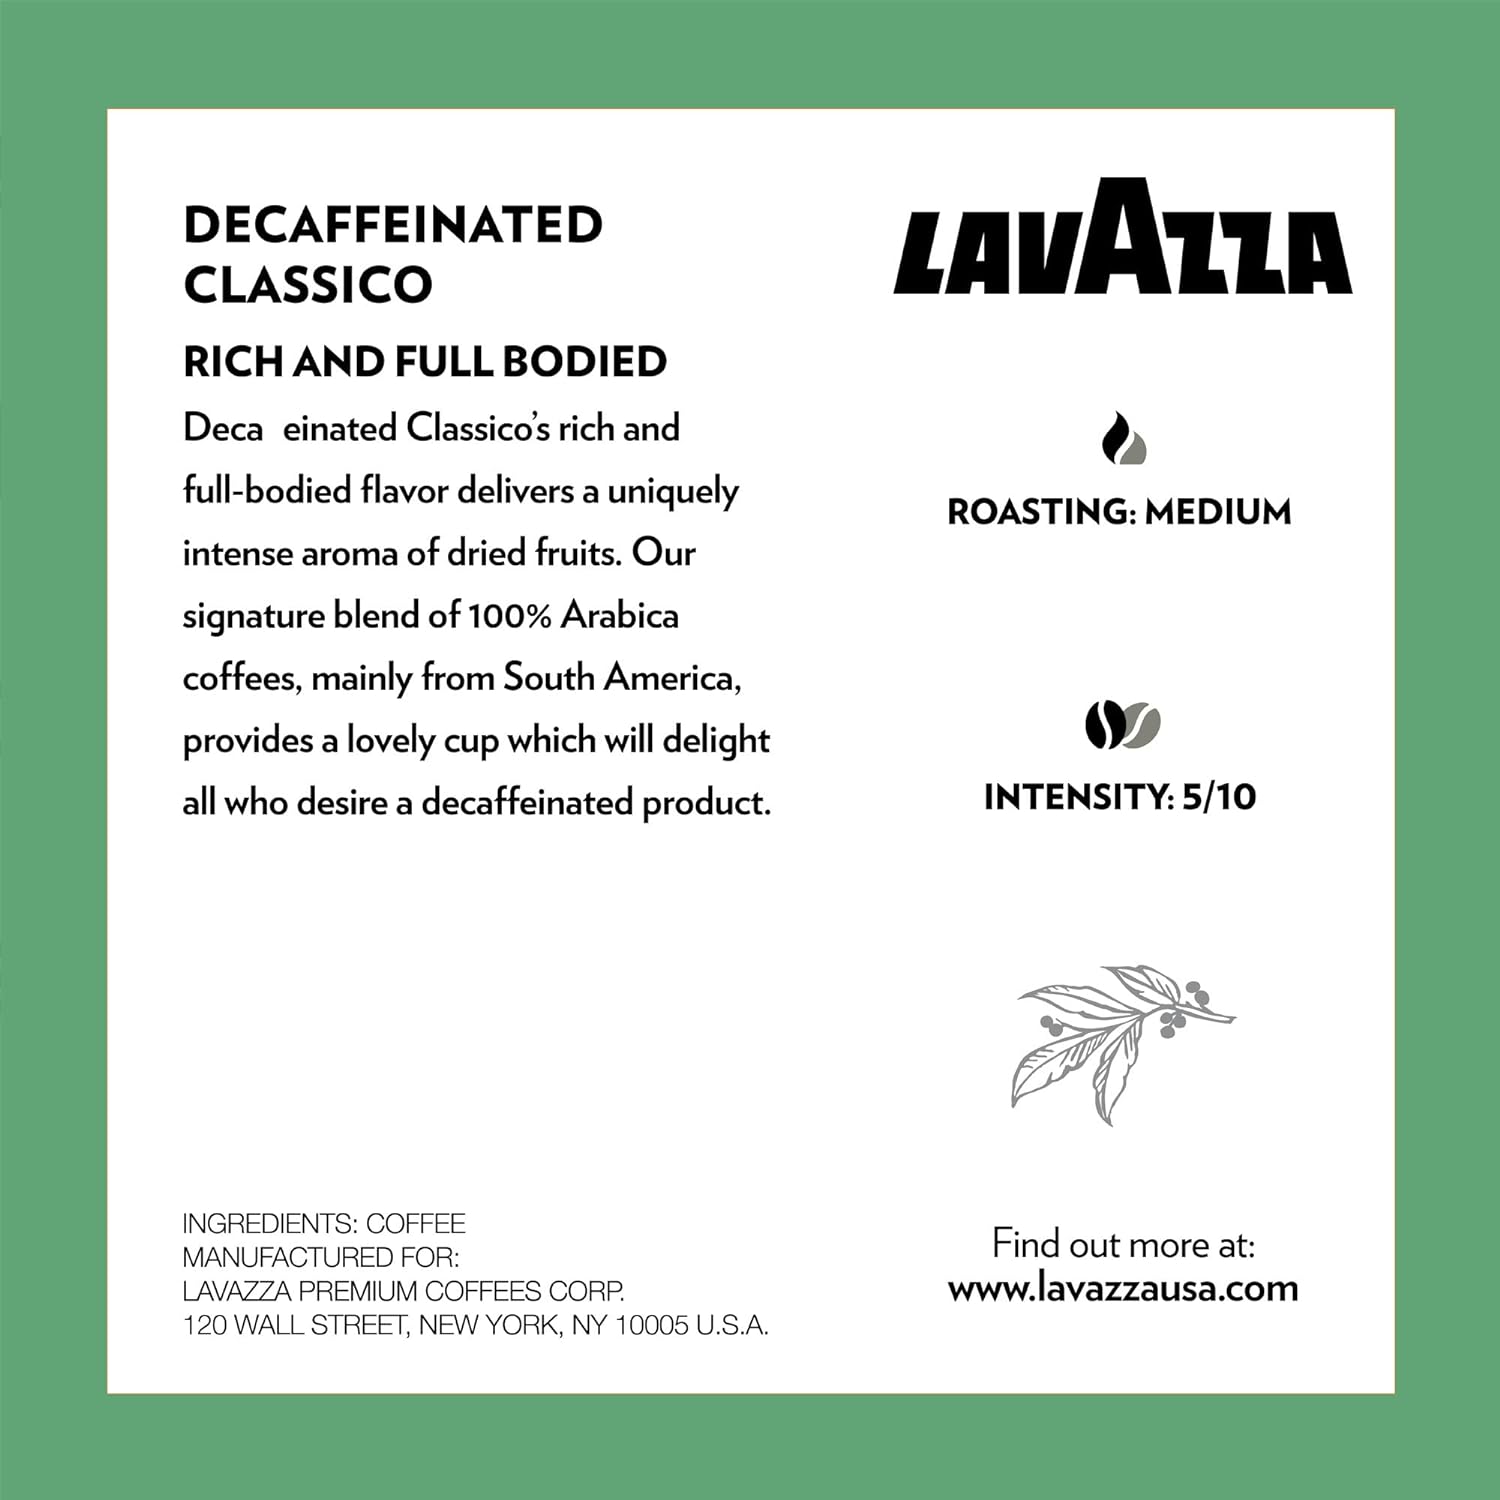 Lavazza Classico Decaf Single-Serve Coffee K-Cups for Keurig Brewer, Medium Roast, 10 Count Box ,Rich and full-bodied flavor delivers a uniquely intense aroma of dried fruits, 100% arabica coffees : Grocery & Gourmet Food